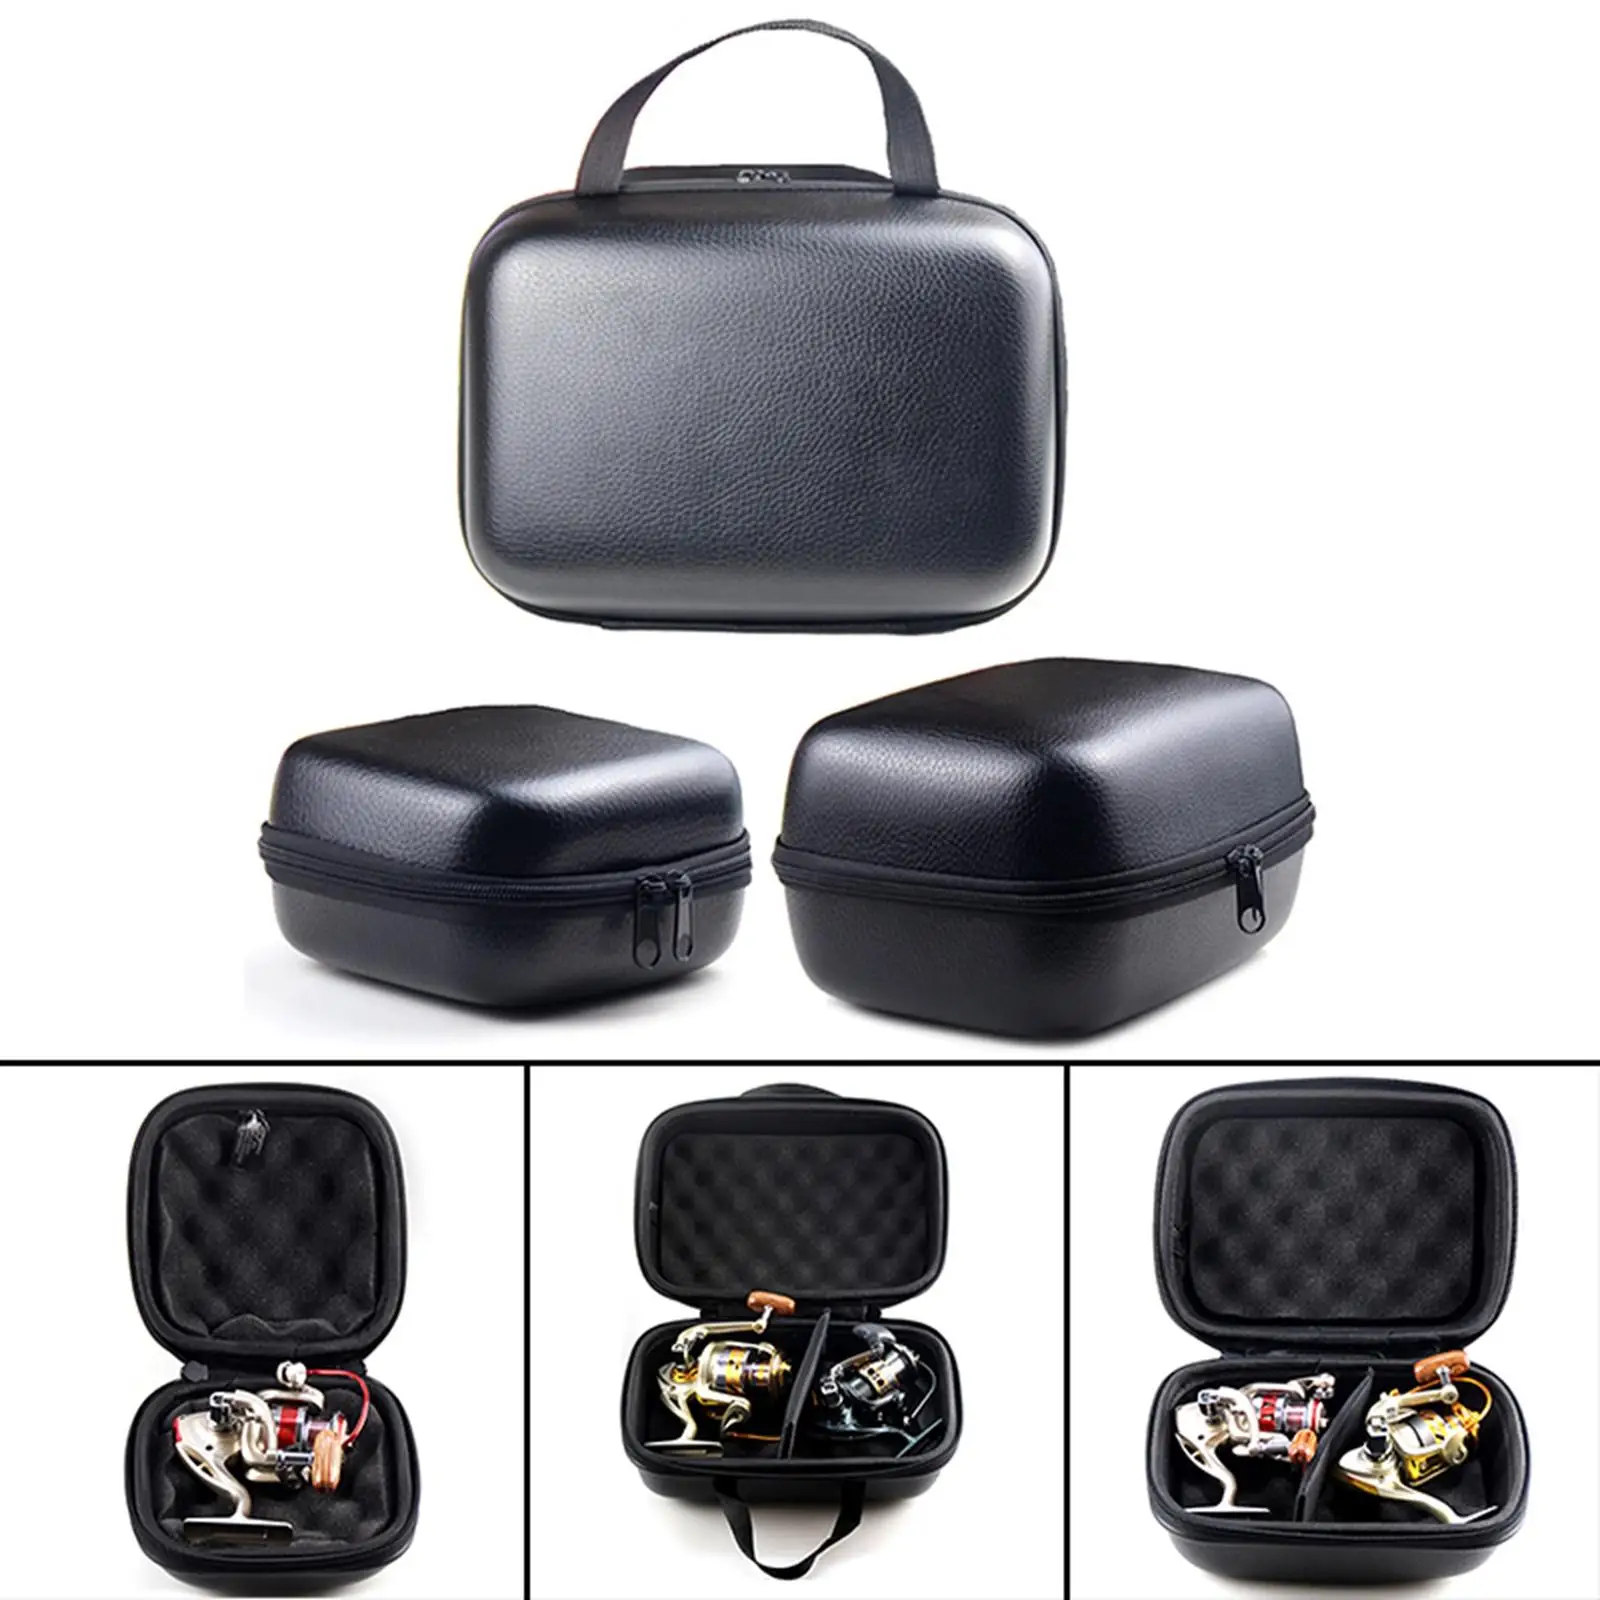 Portable Fishing Reel Case Water Resistant Storage Case Hard Protective Cover